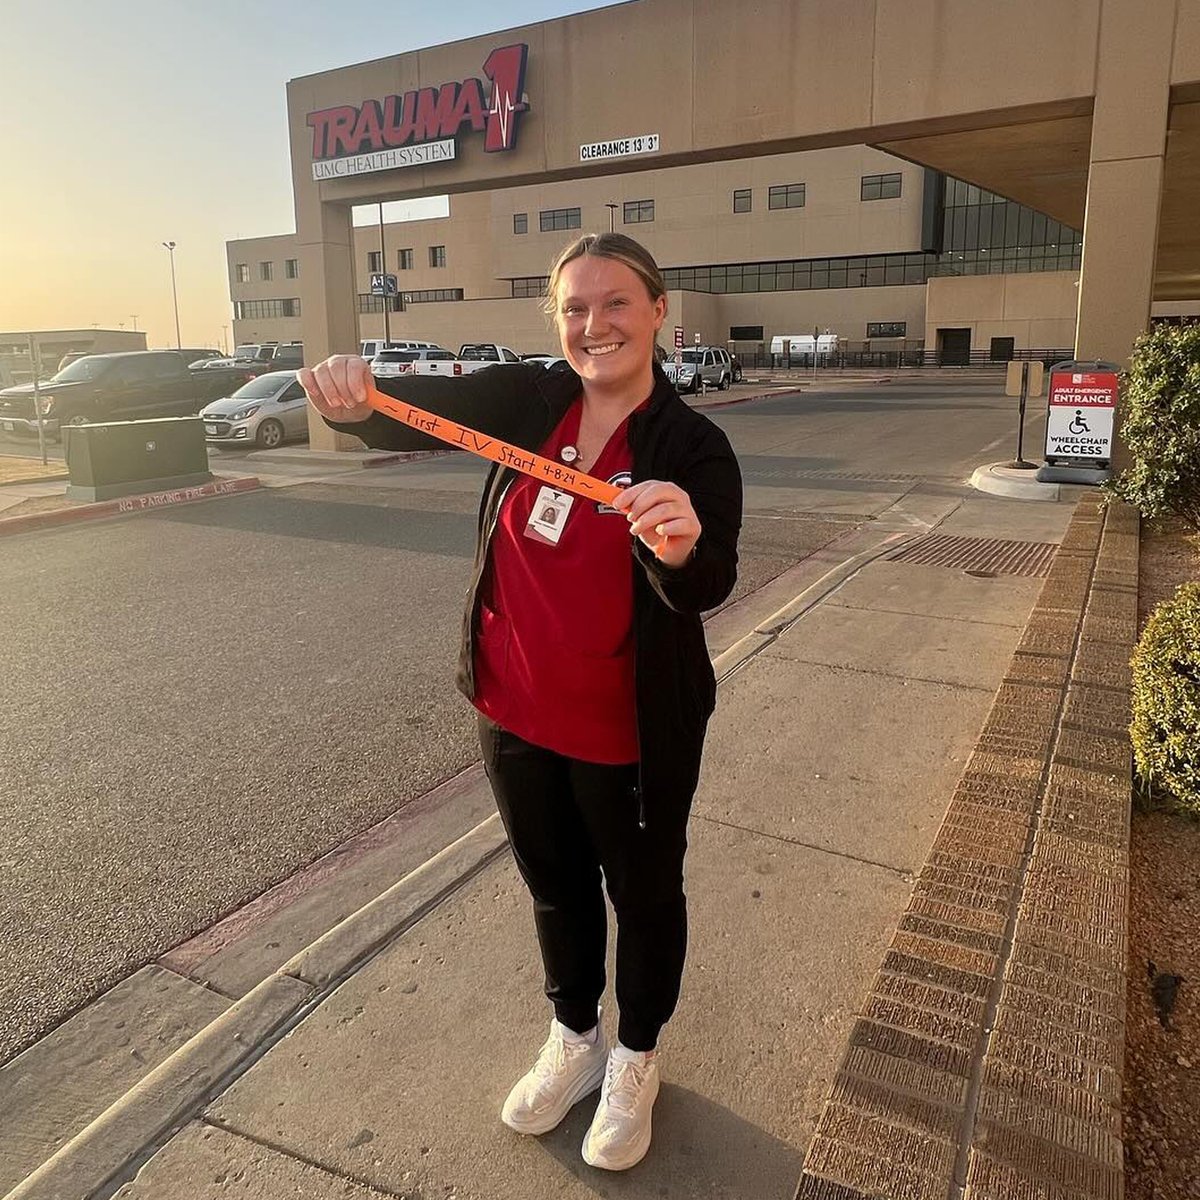 “Made it to the IV league💉🩸 #firstivstick” Posing for a photo with the tourniquet from their first IV start or blood draw is a tradition for nursing students like Emory, and others in the @ttuhscson School of Nursing in Lubbock.